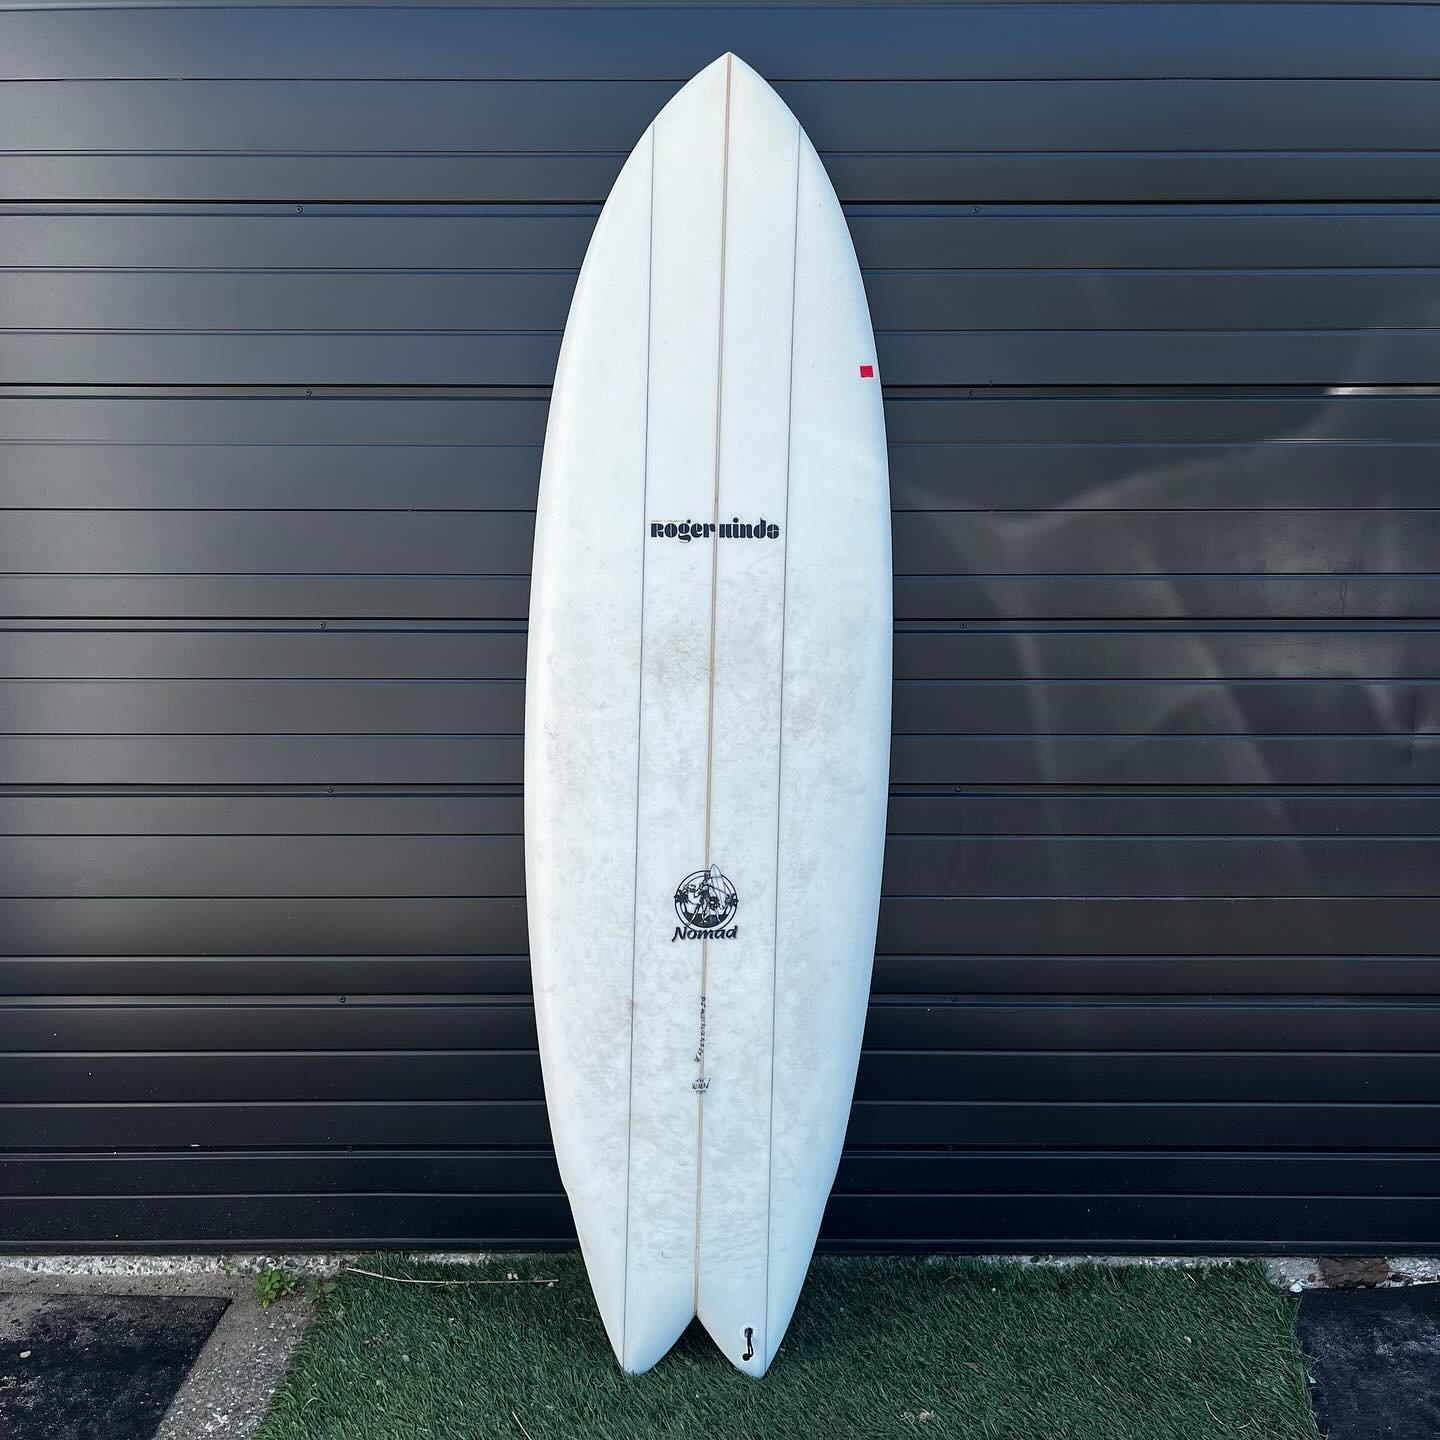 Used @rogerhindssurfboardsofficial Nomad Twin

Great board for some summer fishing
Good condition 
6&rsquo;3 x 21 1/2 x 2 7/8

-$599-